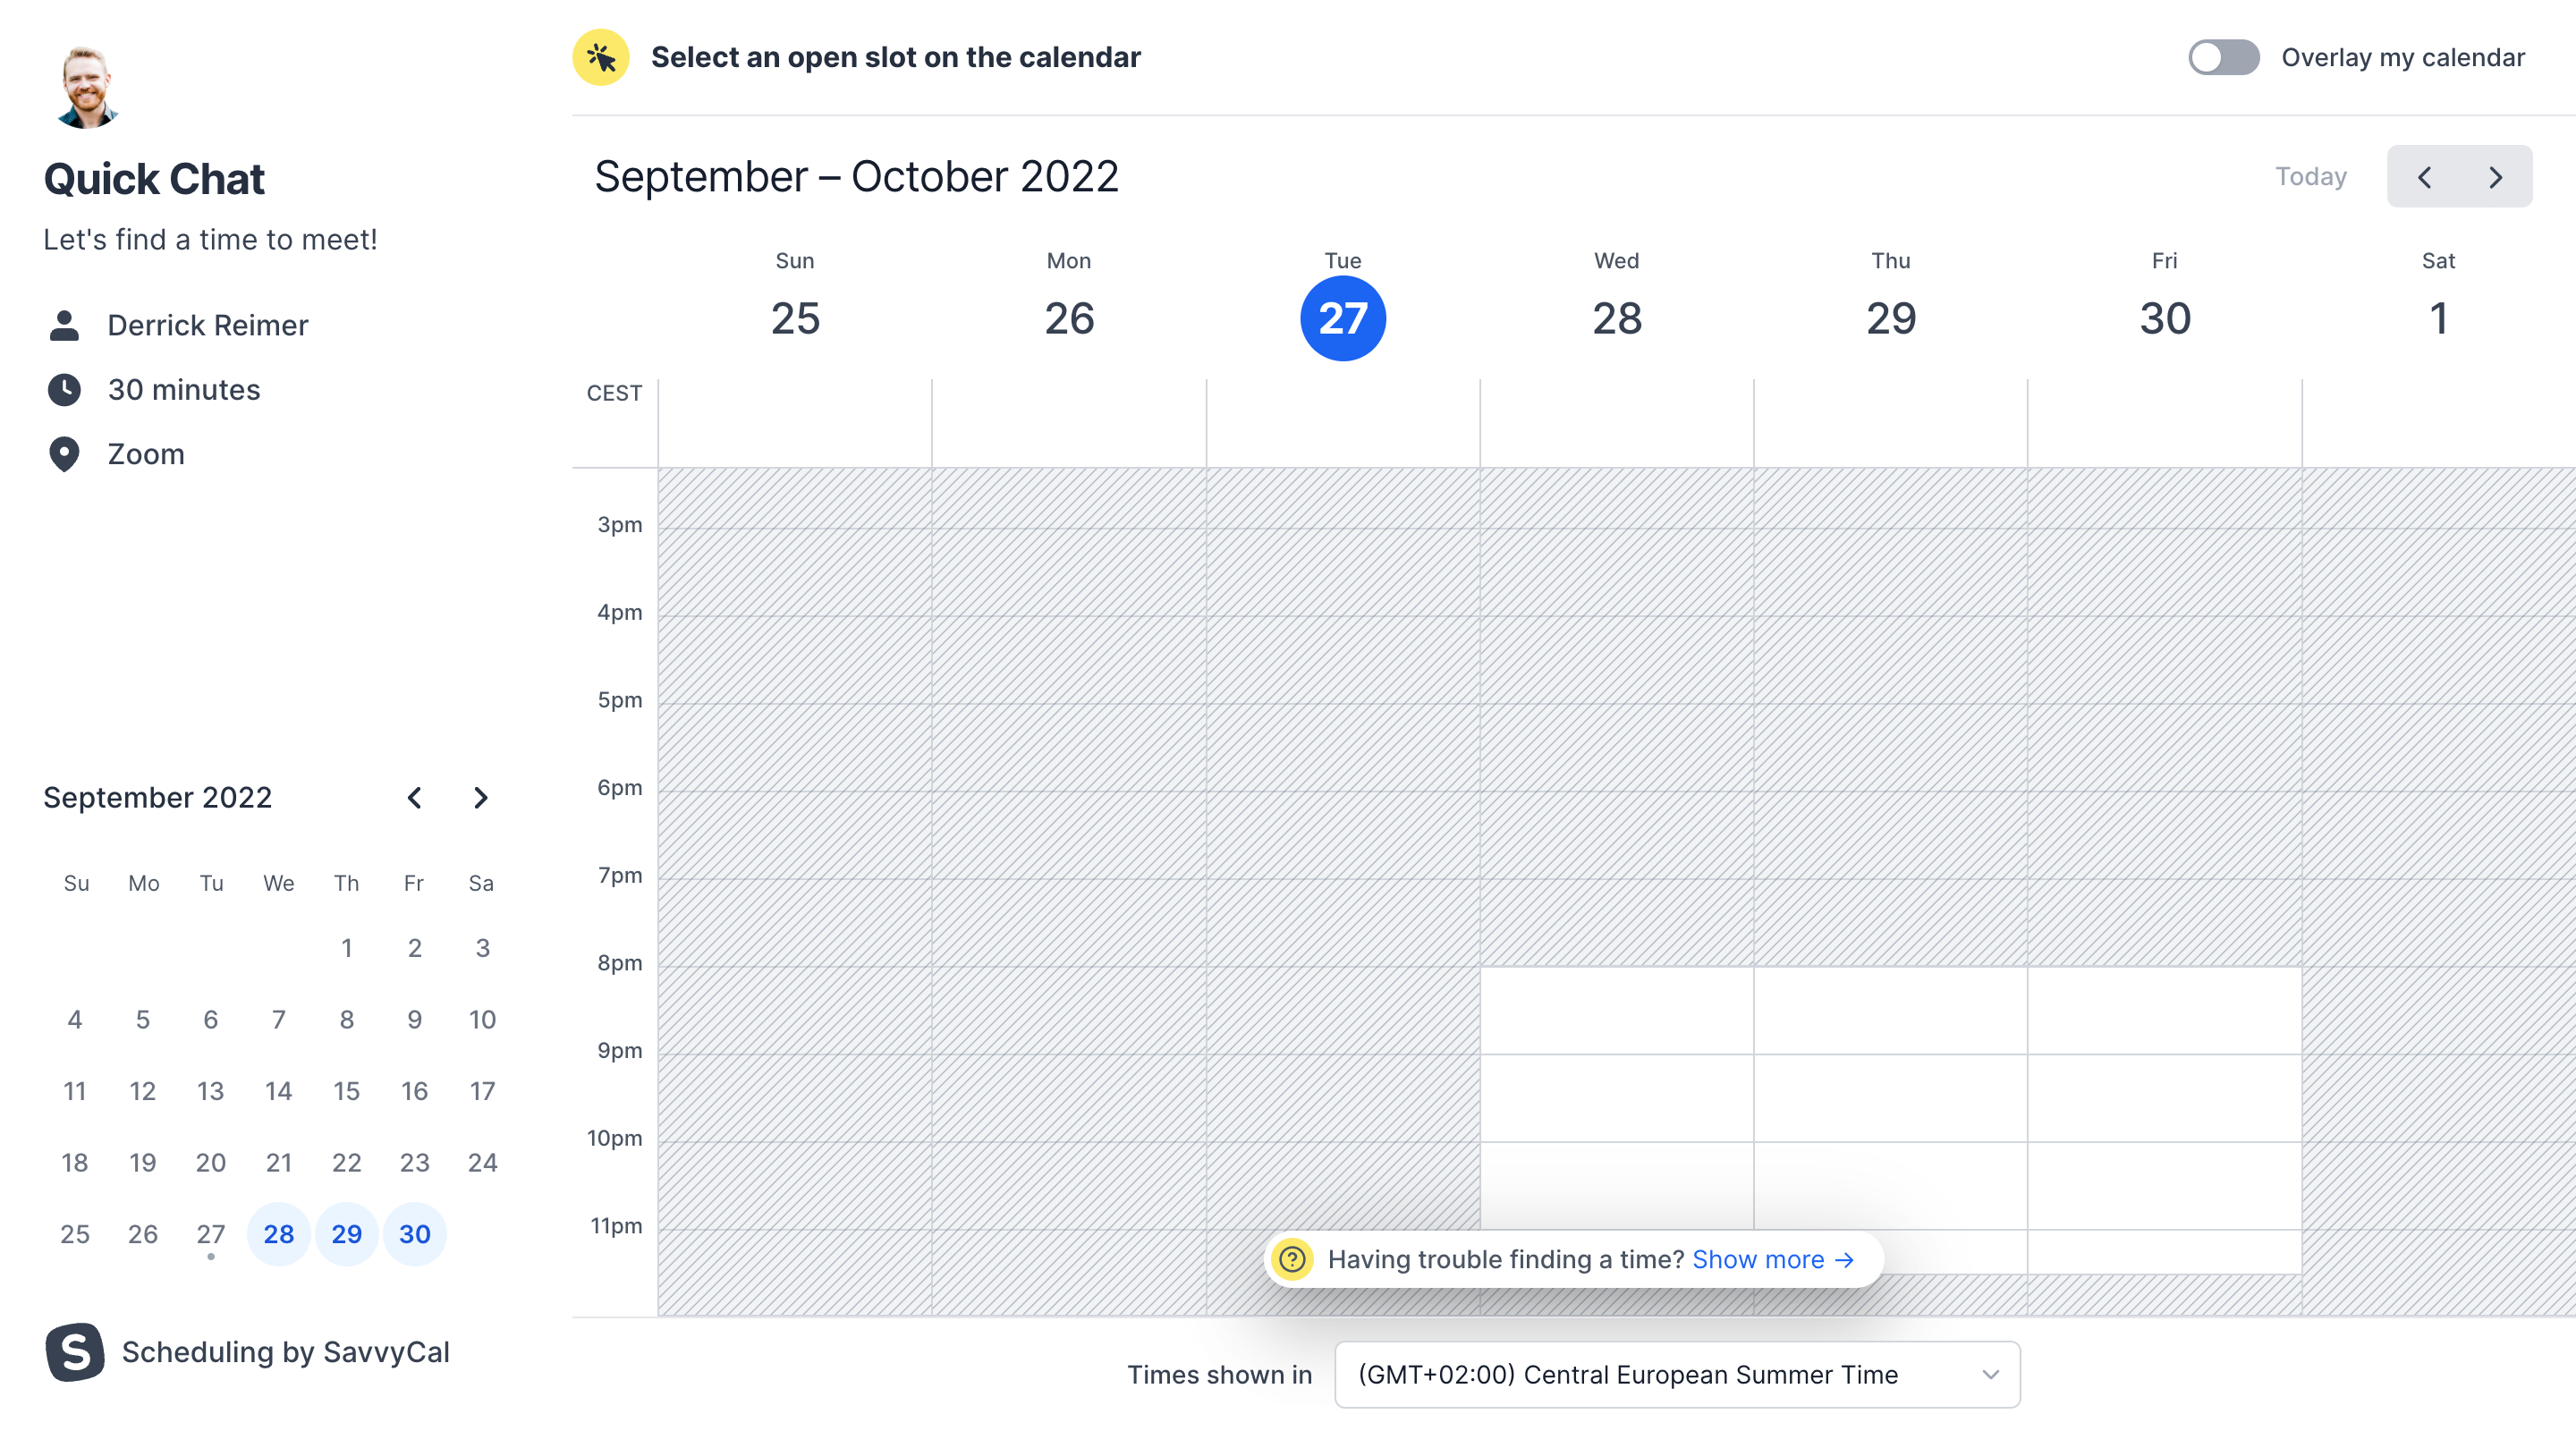 Screenshot of the SavvyCal website. The visible section shows a demo of the SavvyCal interface that includes some meeting details and a calendar where the user can select a meeting date. A larger week view is show on the right side of the screen.